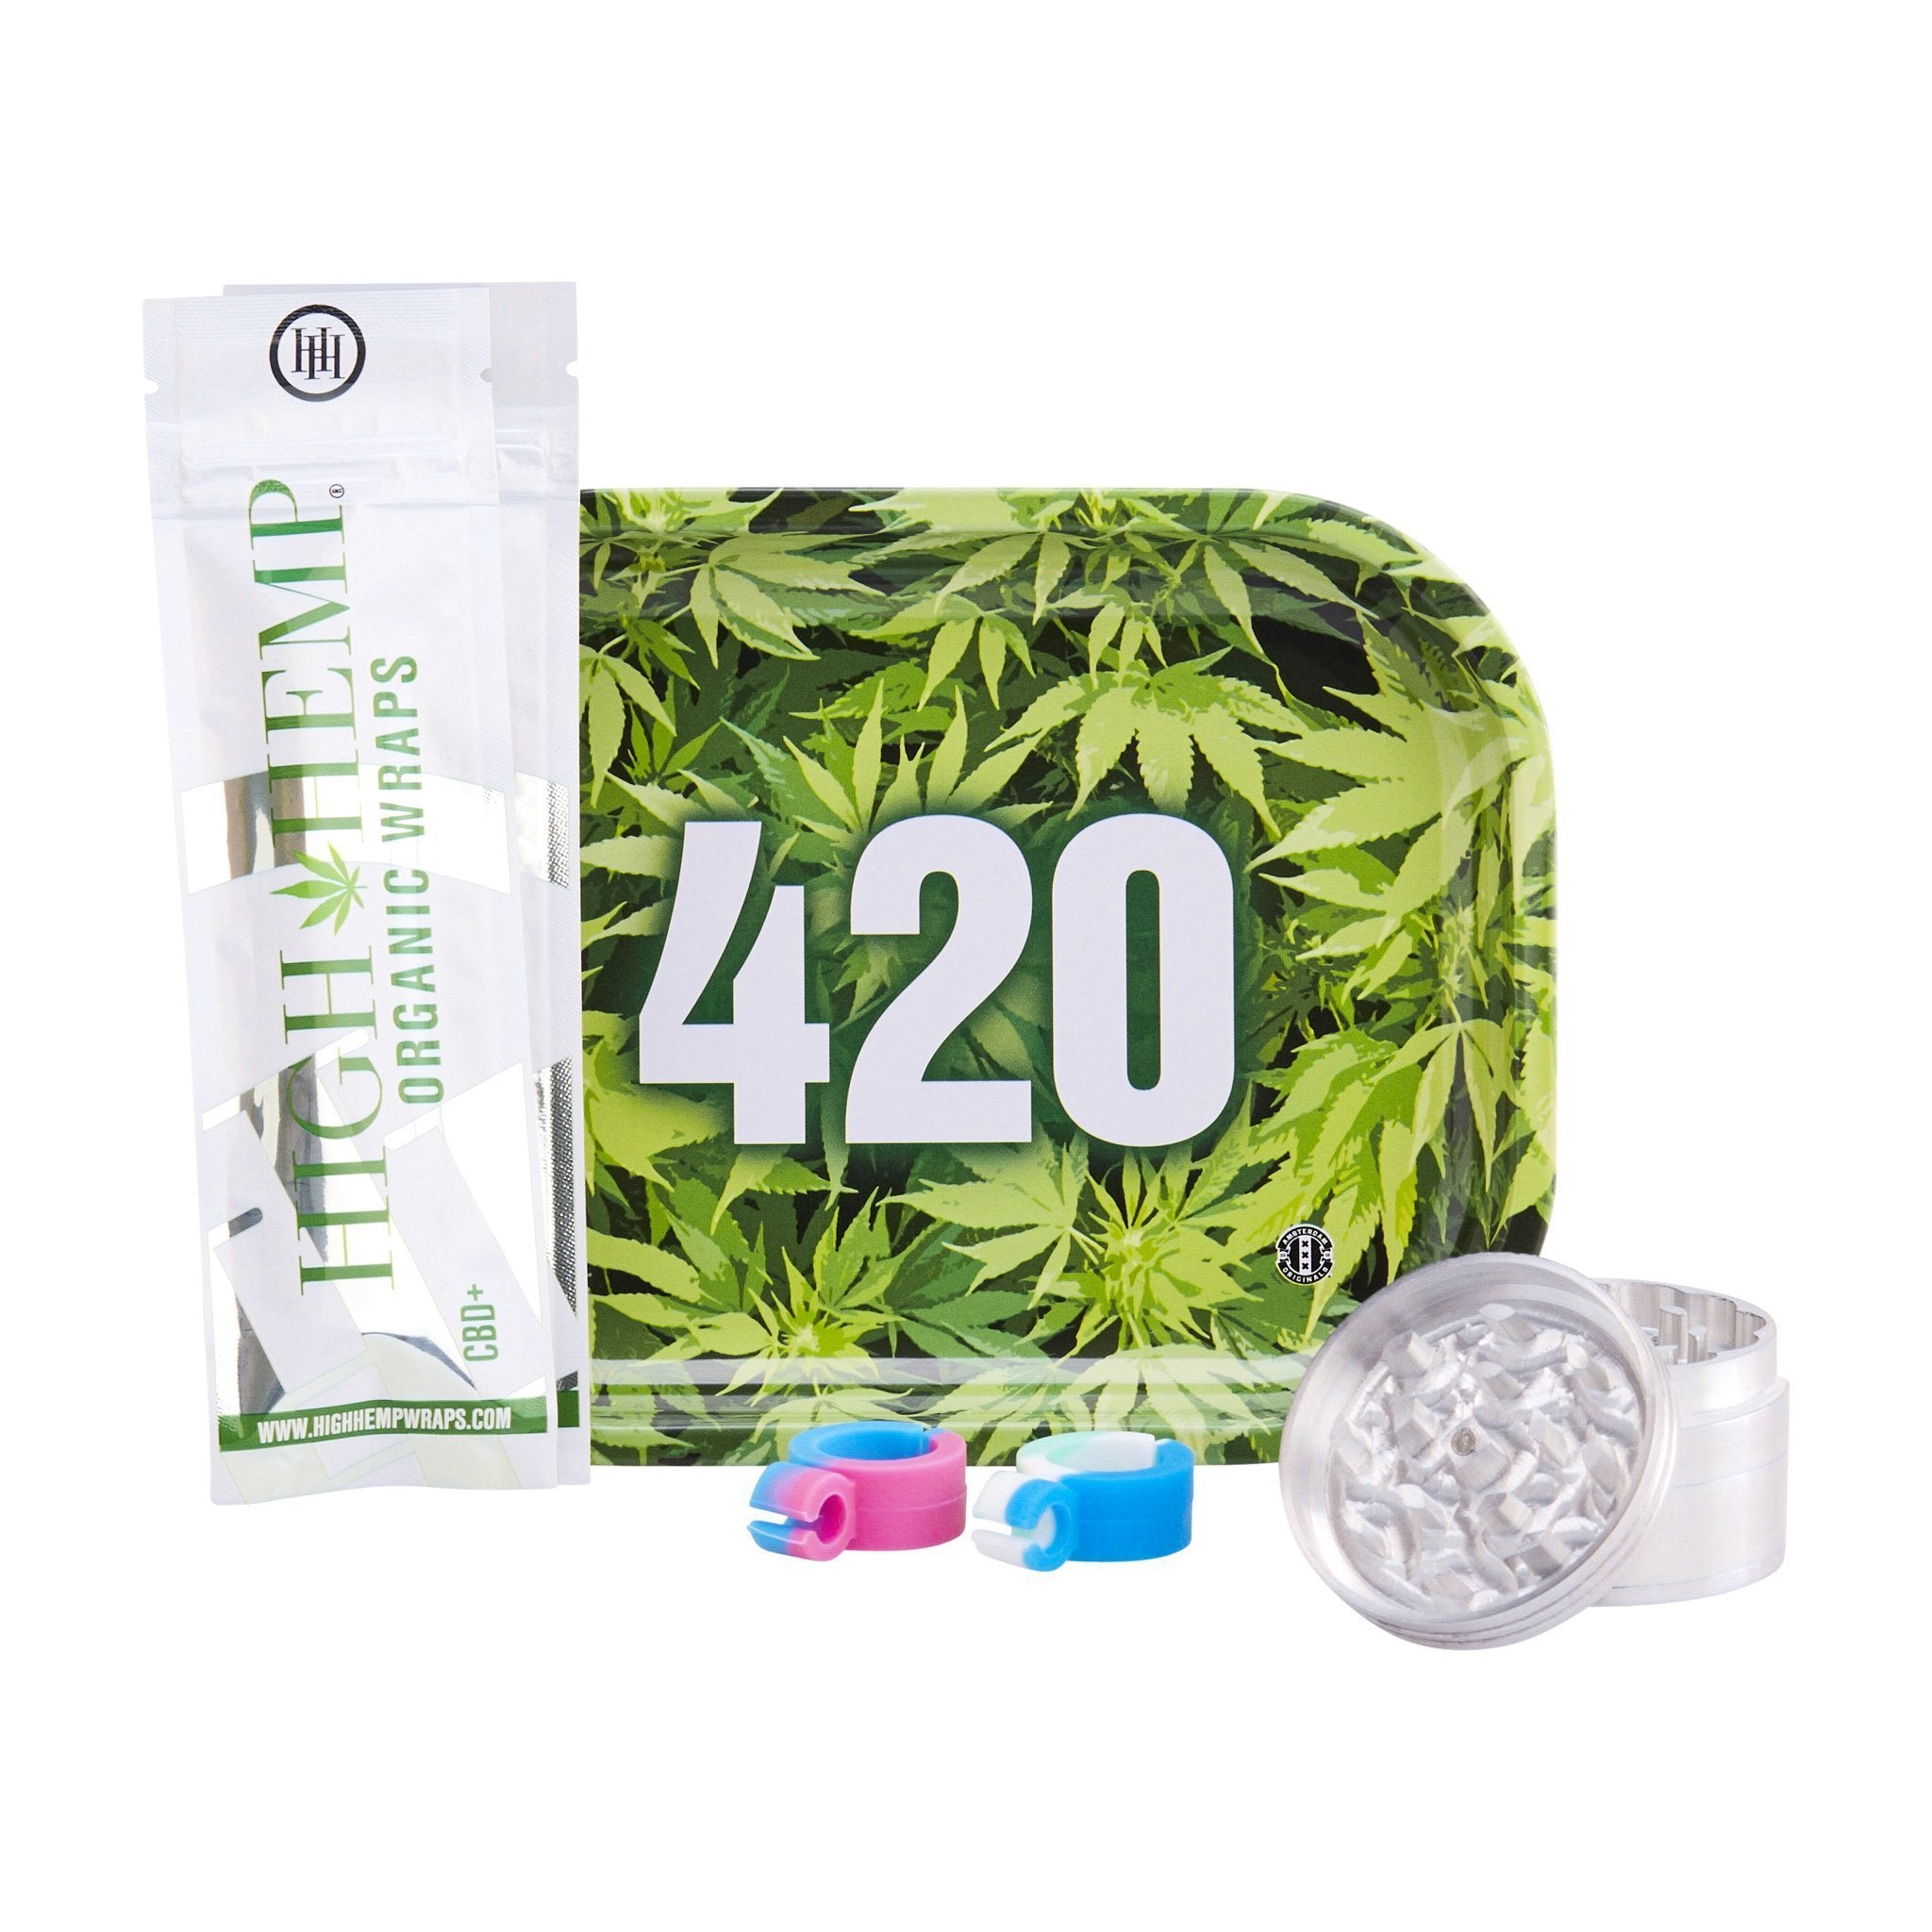 Set of smoking accessories 420 tray weed leaf design, high hemp, organic wraps, grinder, silicone cap fun colors